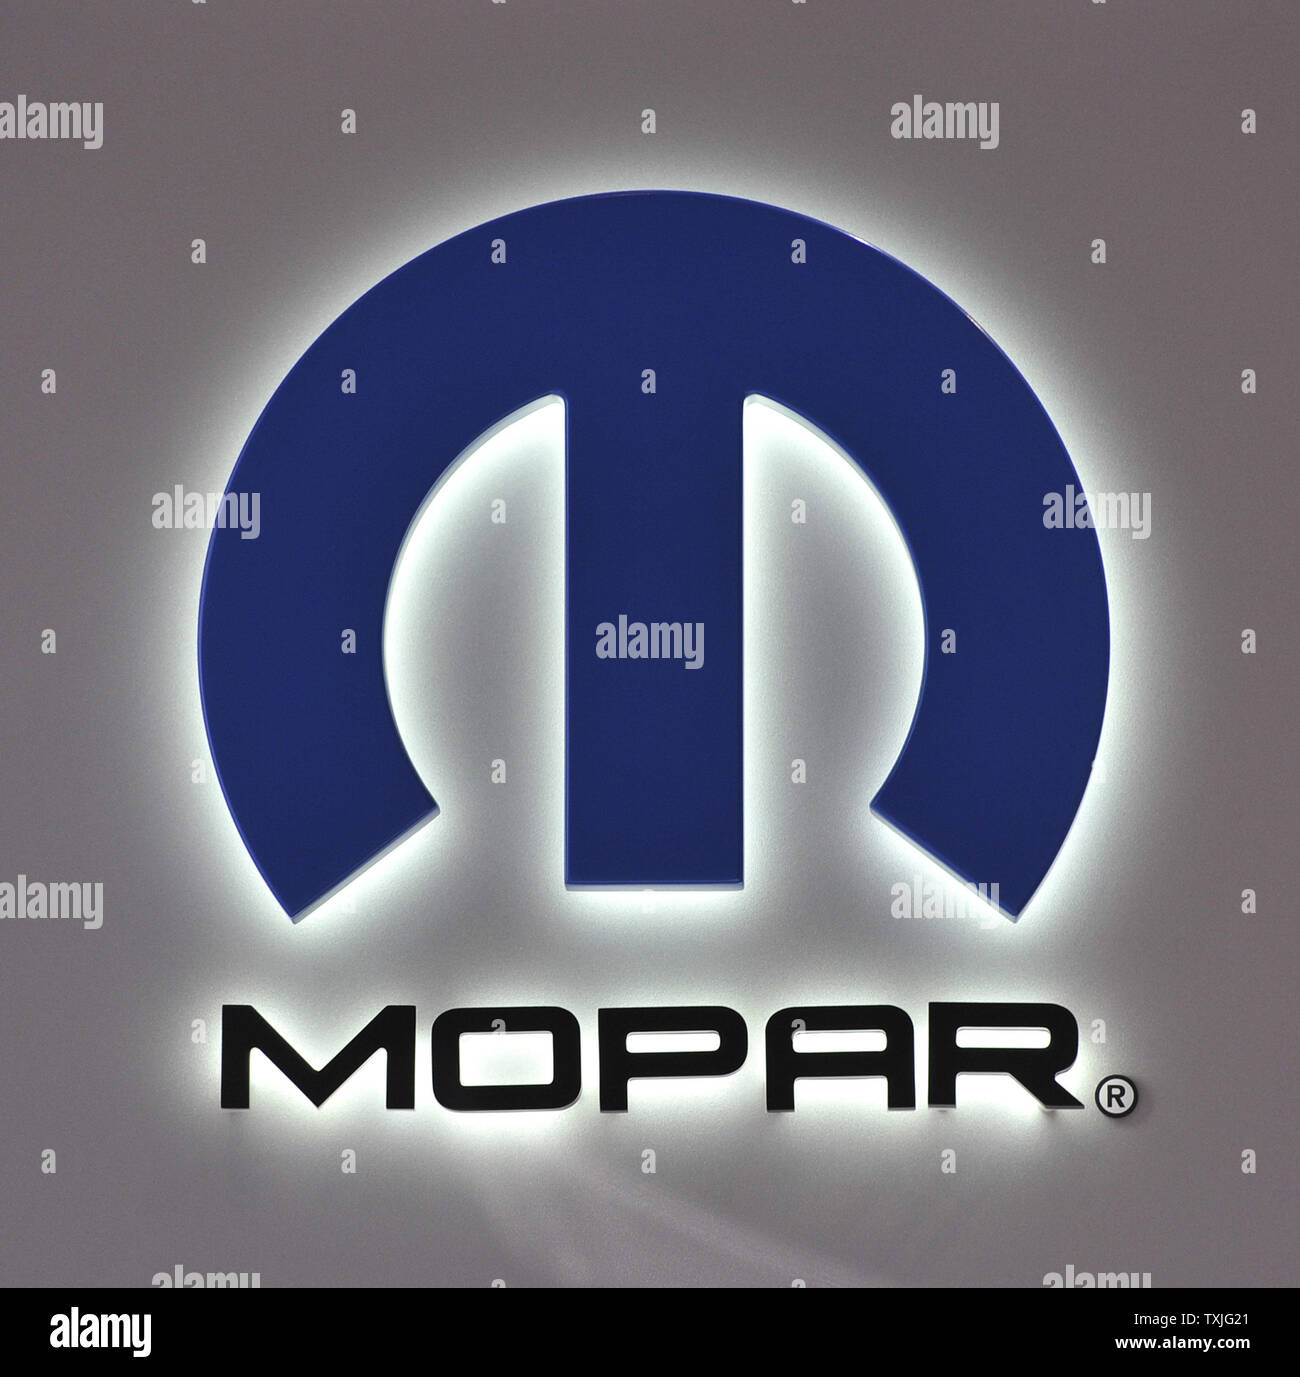 The logo for Mopar, Chrysler's aftermarket parts company, is ...